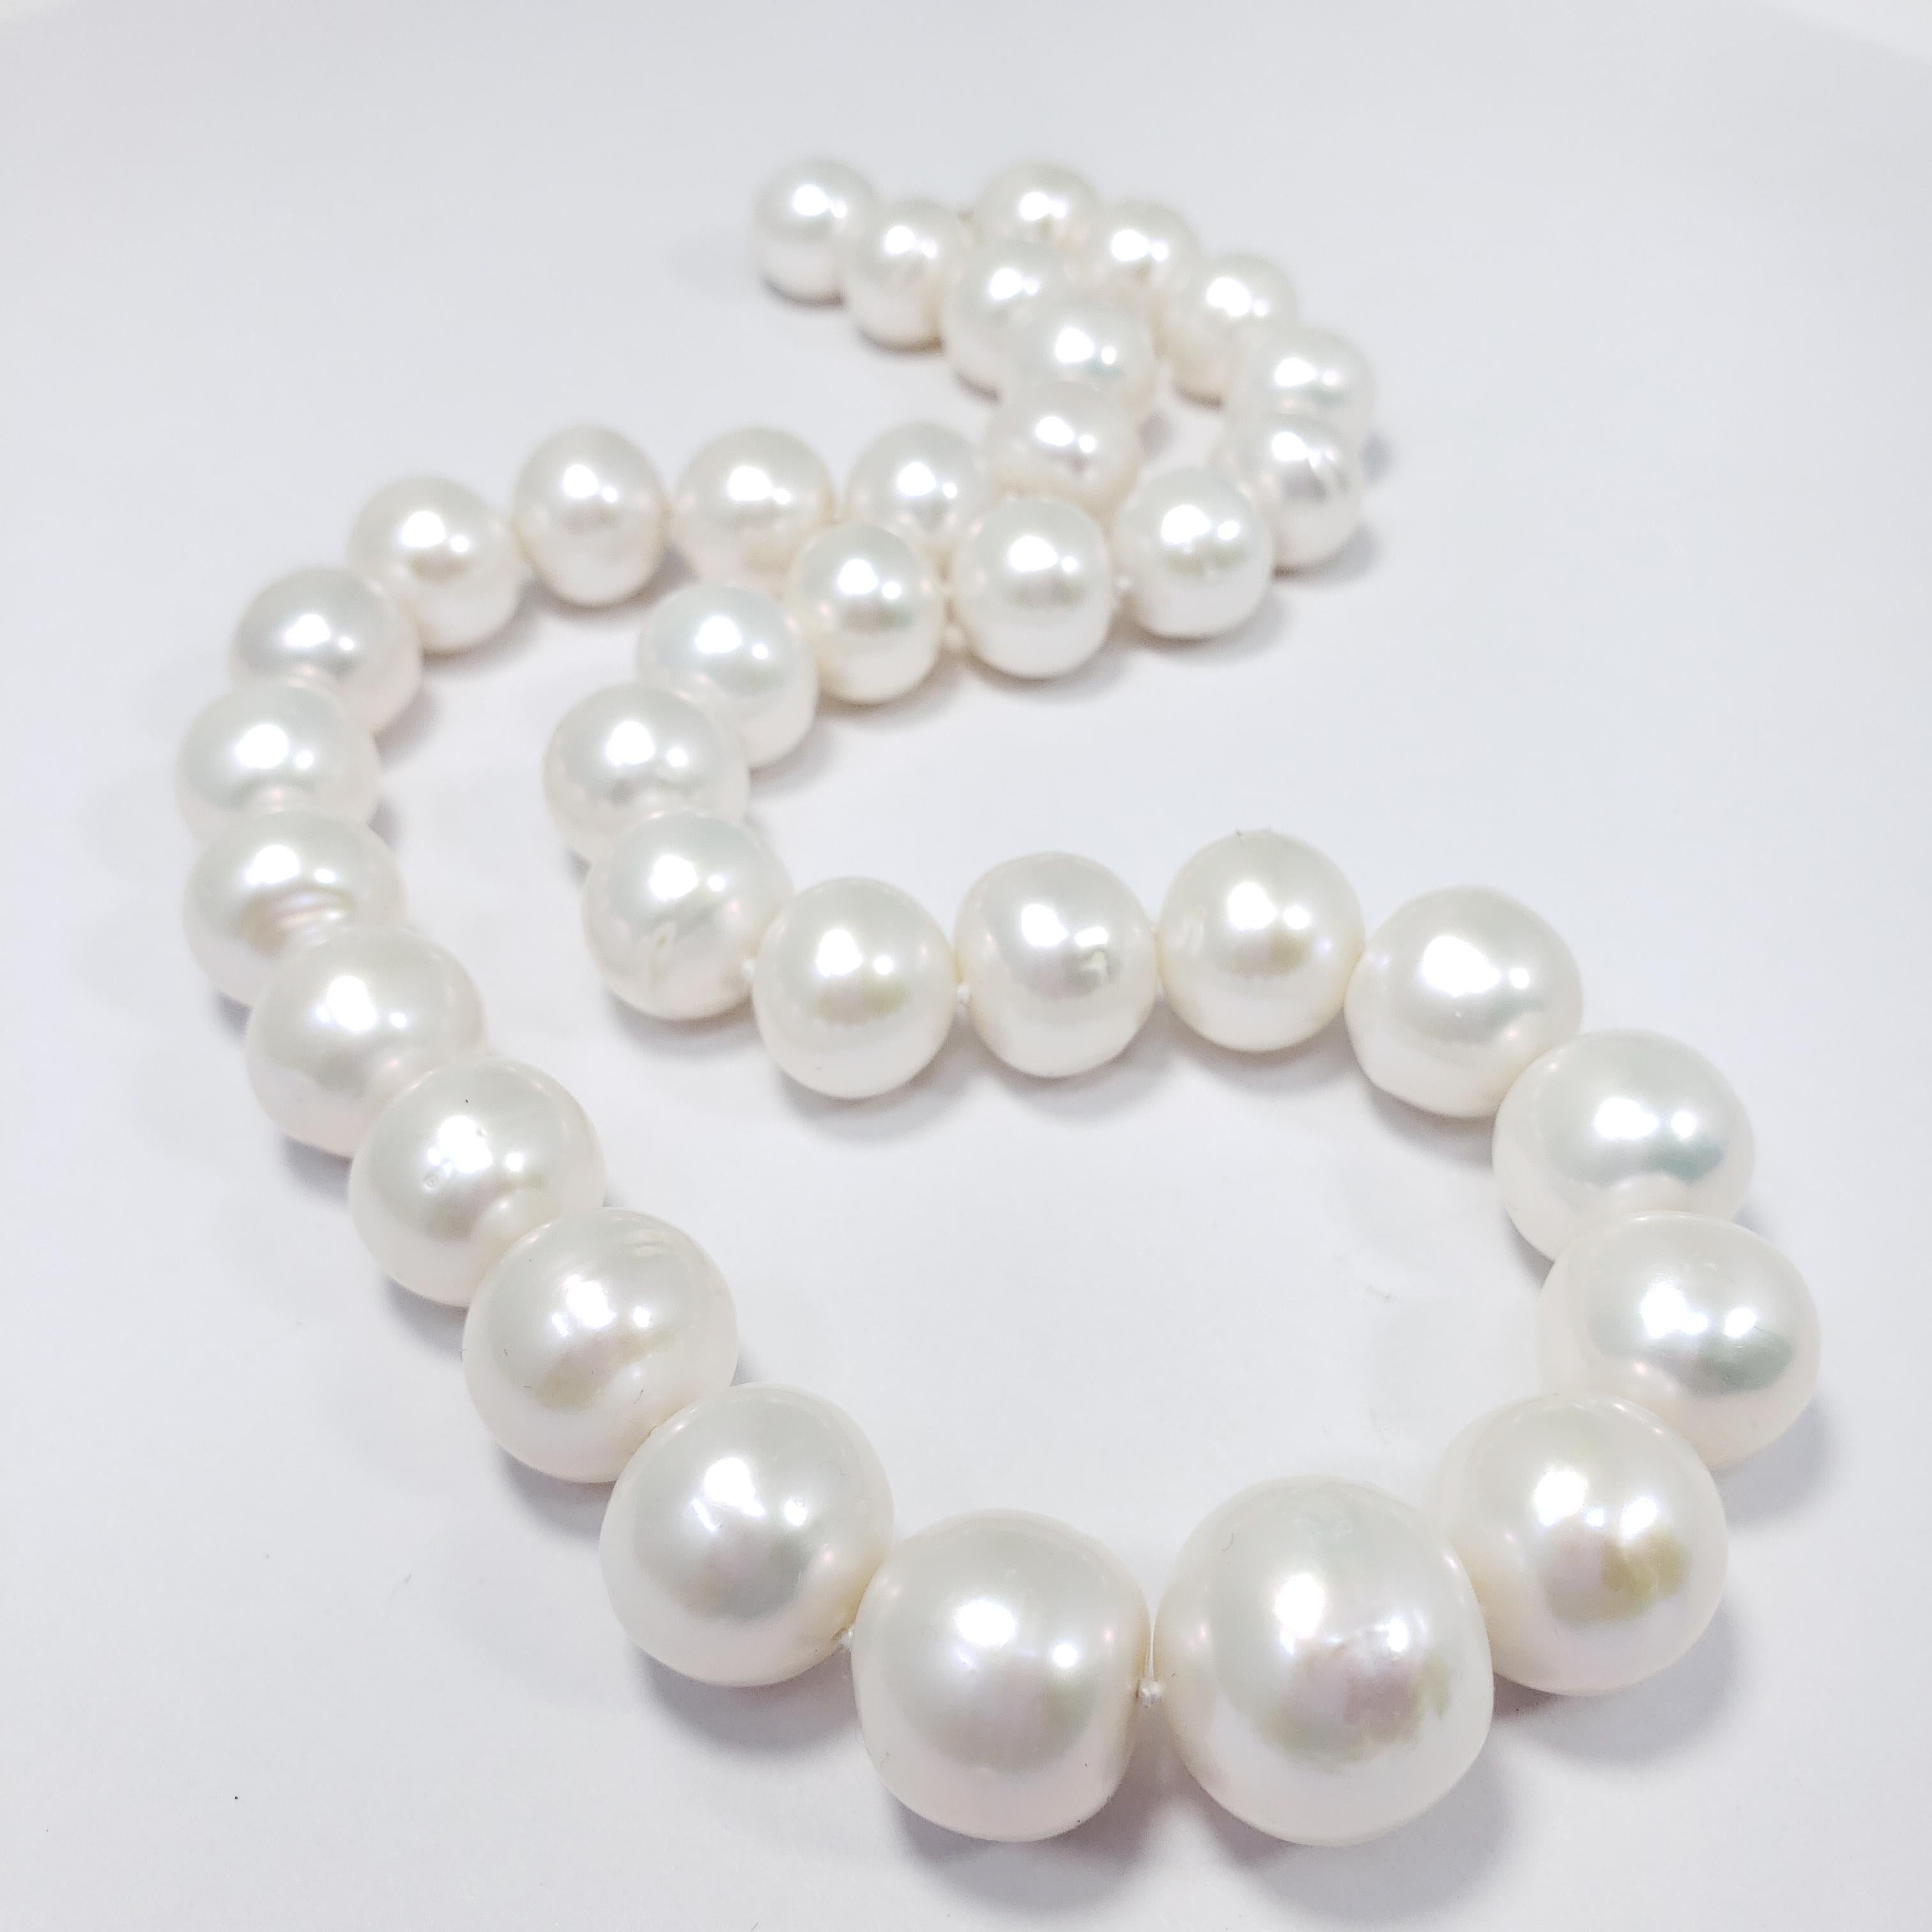 An exquisite South Sea pearl necklace! Features graduated white pearls on a knotted string, accented with a 14K yellow gold crabclaw clasp. A perfect final touch to any style!

Hallmarks: 585
Pearls range from 11.5mm to 14.9mm
Necklace length 46cm